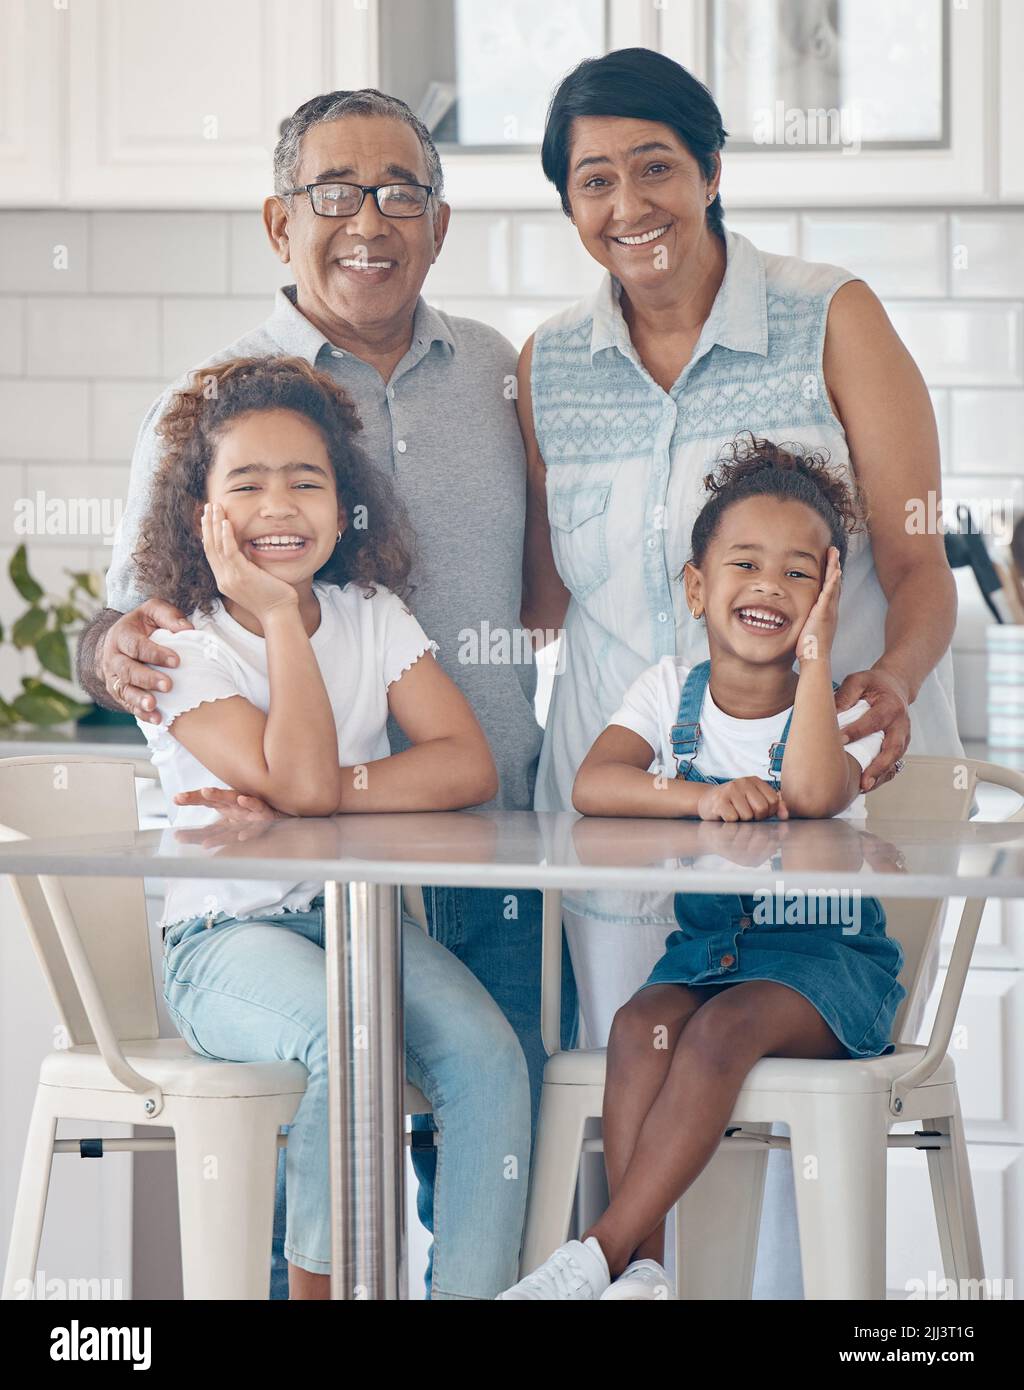 Seeing the little ones grow. grandparents spending time with their grandchildren. Stock Photo